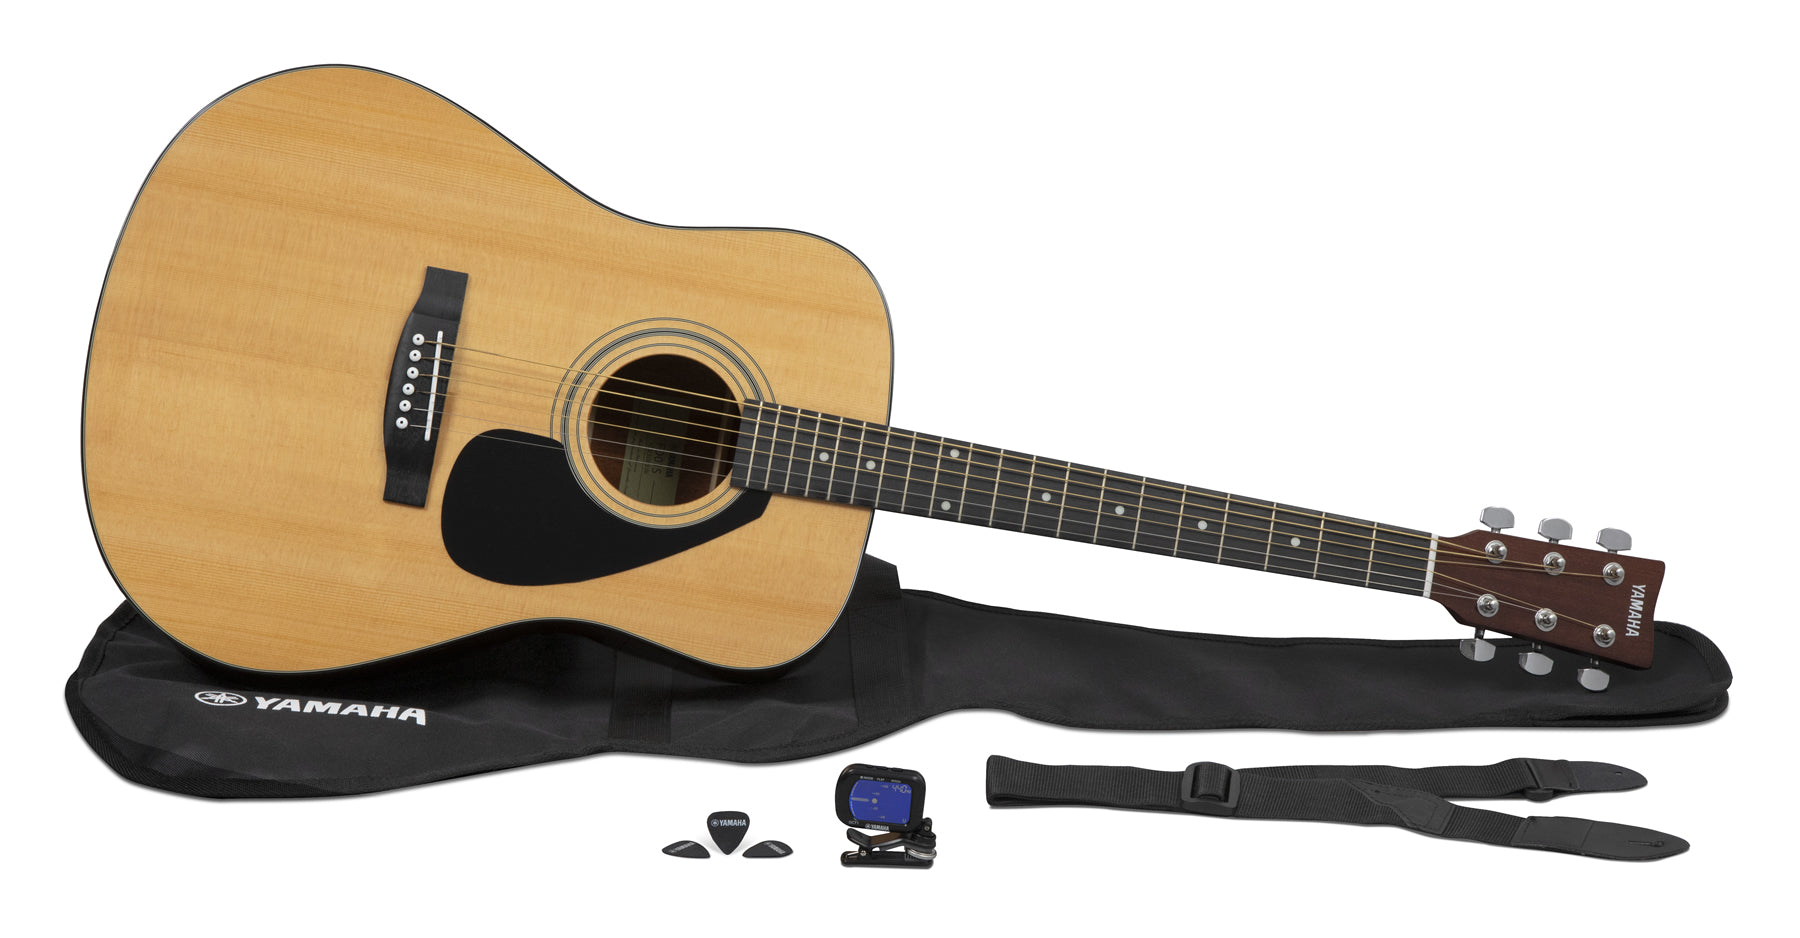 Yamaha Gigmaker Deluxe acoustic guitar package with case, strap, tuner, and picks